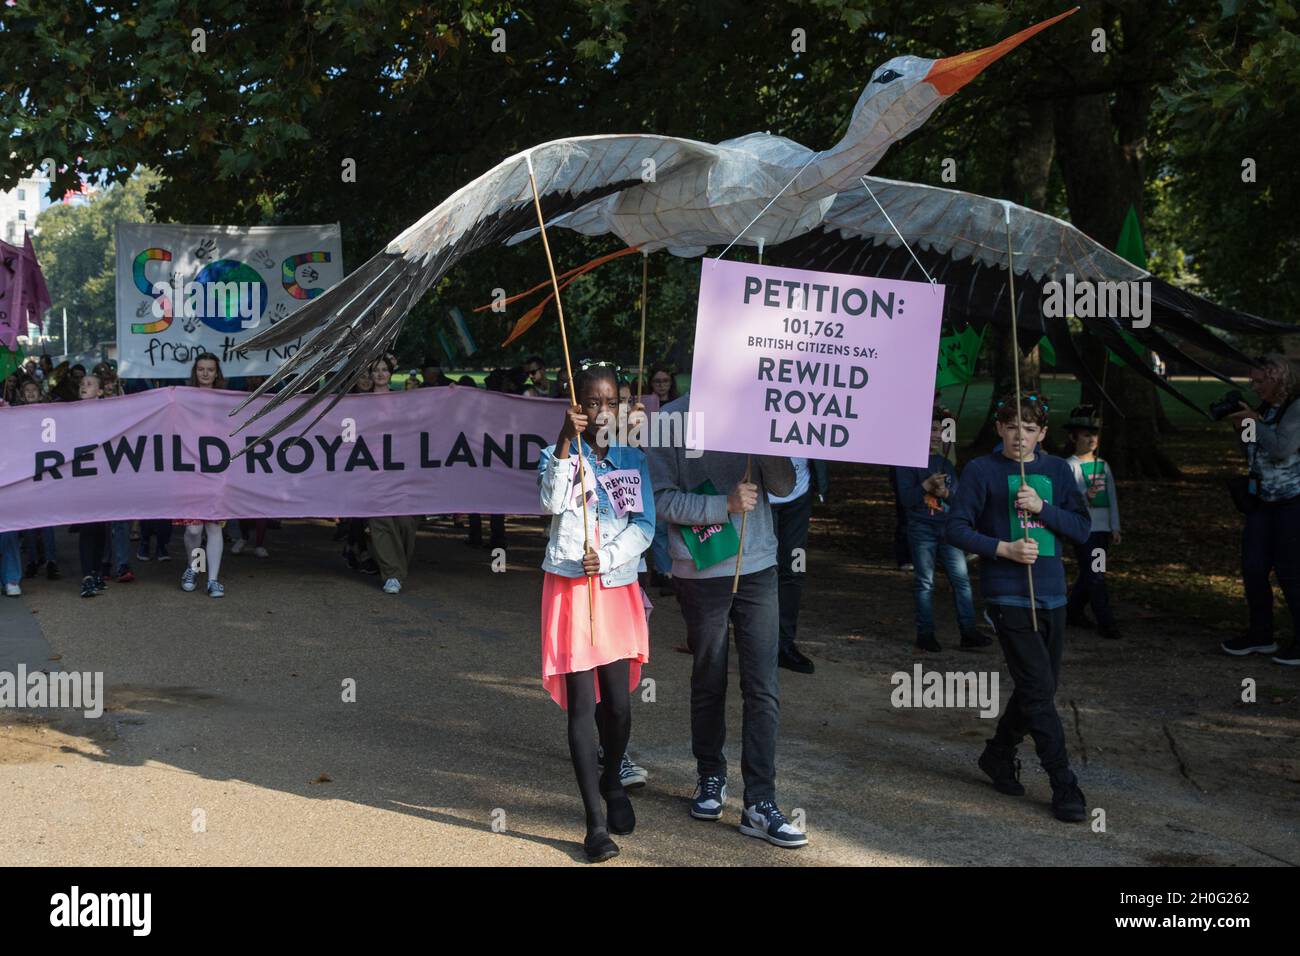 London, UK. 9th October, 2021. Climate activists, including many families, take part in a Rewild Royal Land procession to Buckingham Palace organised by Wild Card, a new campaign calling on the UK’s biggest landowners to rewild, and 38 Degrees. Campaigners including conservationist and broadcaster Chris Packham are calling on the Royal Family, the largest landowning family in the UK, to rewild their estates in order to assist with tackling the climate crisis and a 14-year-old boy presented a petition at the gates of Buckingham Palace signed by over 100,000 people. Credit: Mark Kerrison/Alamy L Stock Photo